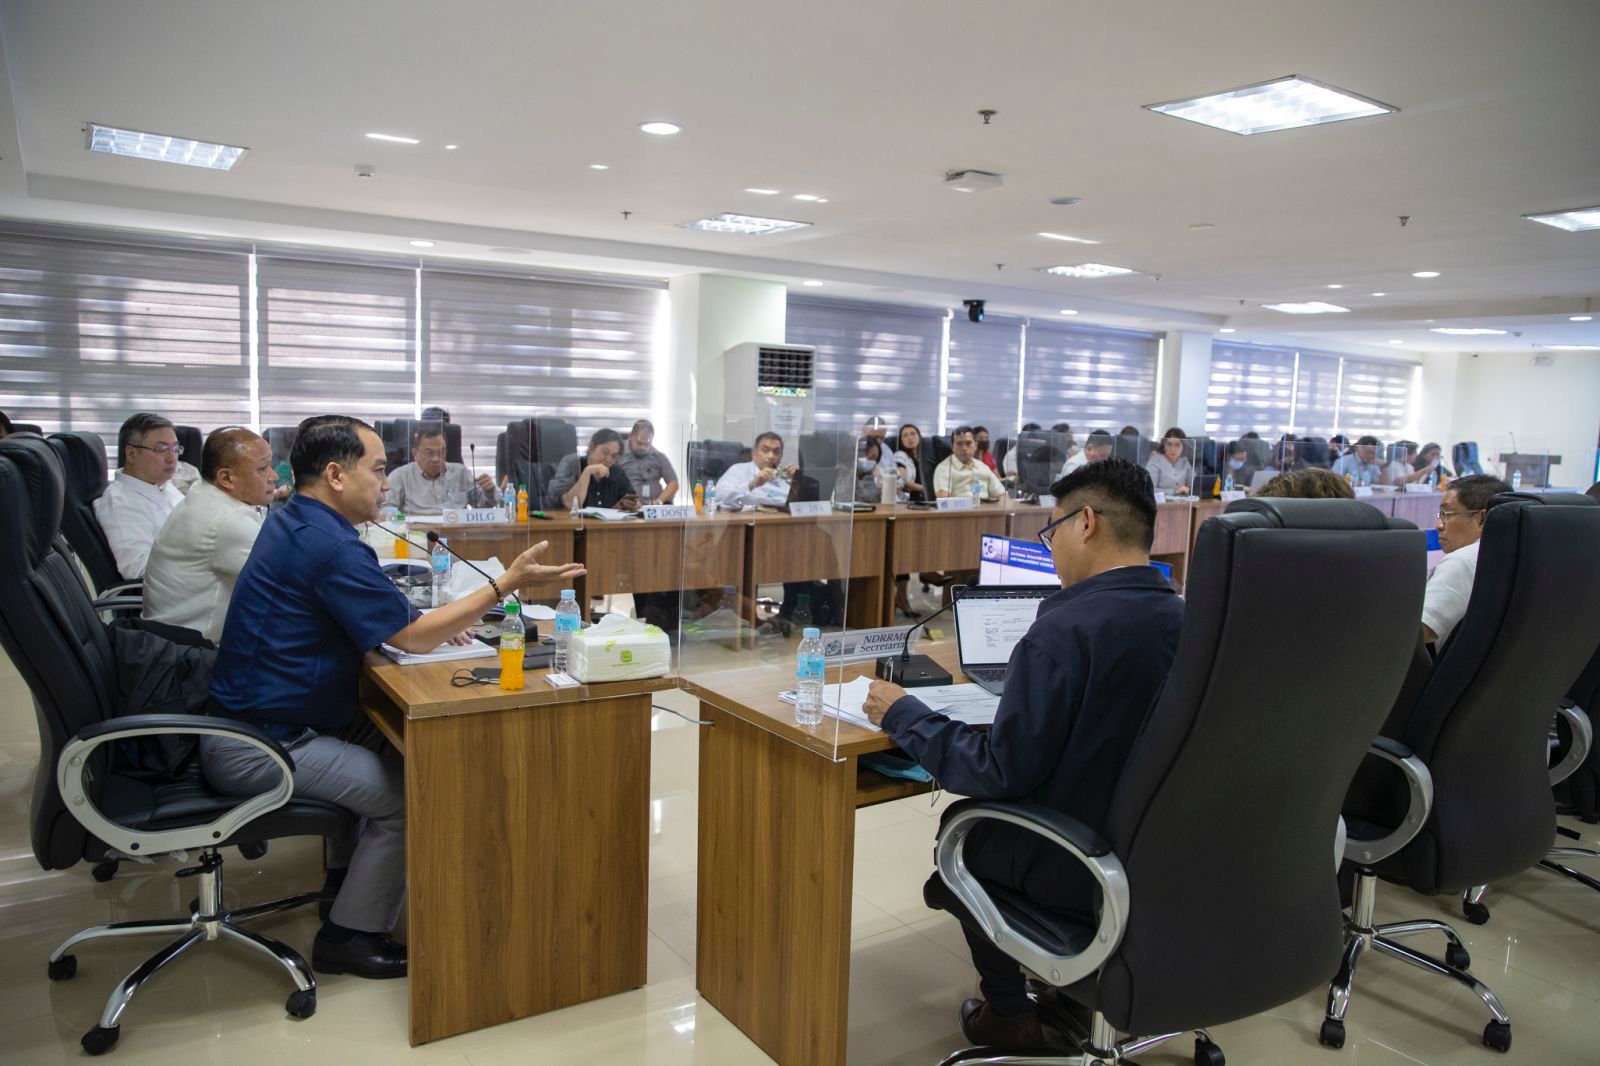 OCD Administrator and NDRRMC Executive Director Ariel Nepomuceno leads the Full Council discussions on the Mindoro Oil Spill in Camp Aguinaldo, Quezon City. | Photo from NDRRMC